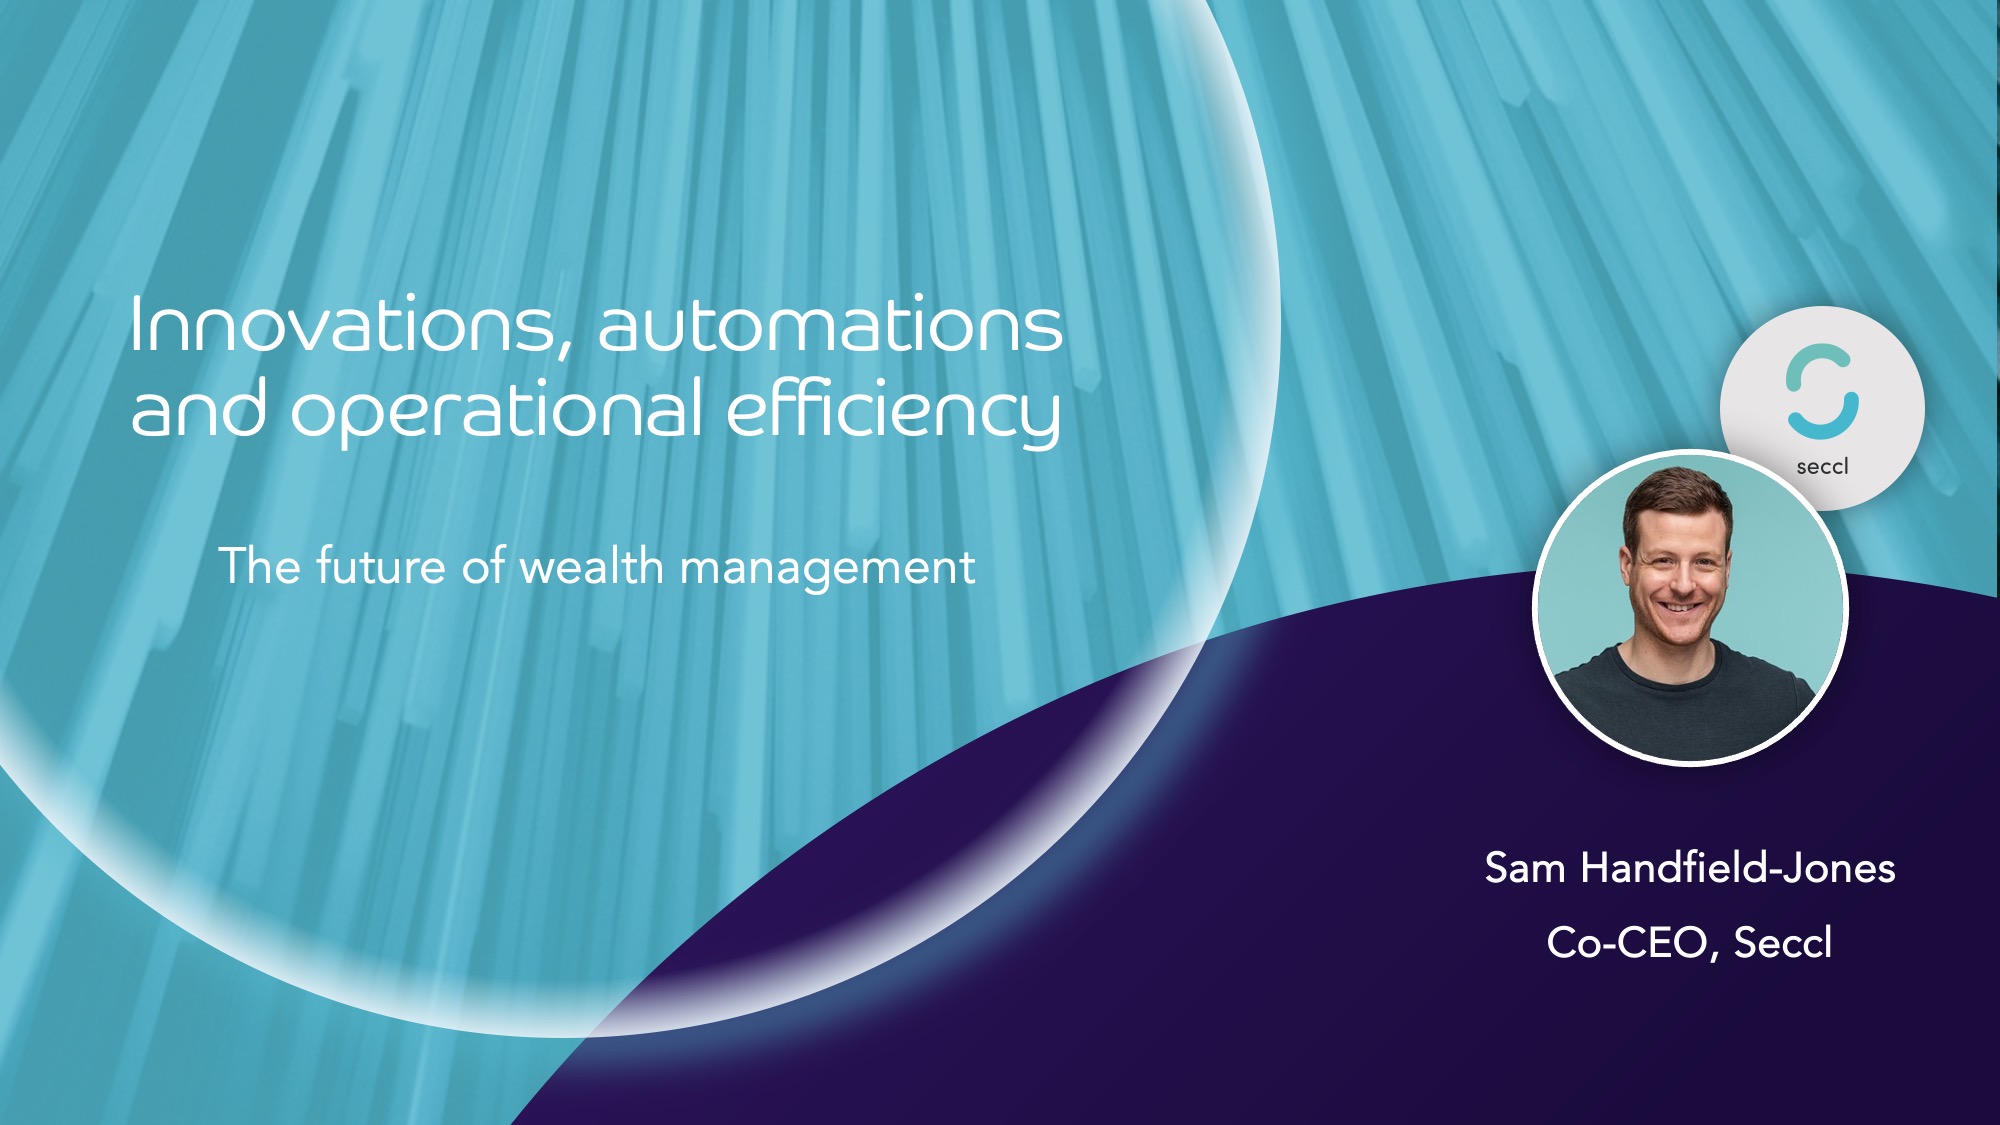 Innovations, automations and operational efficiency: the future of wealth management